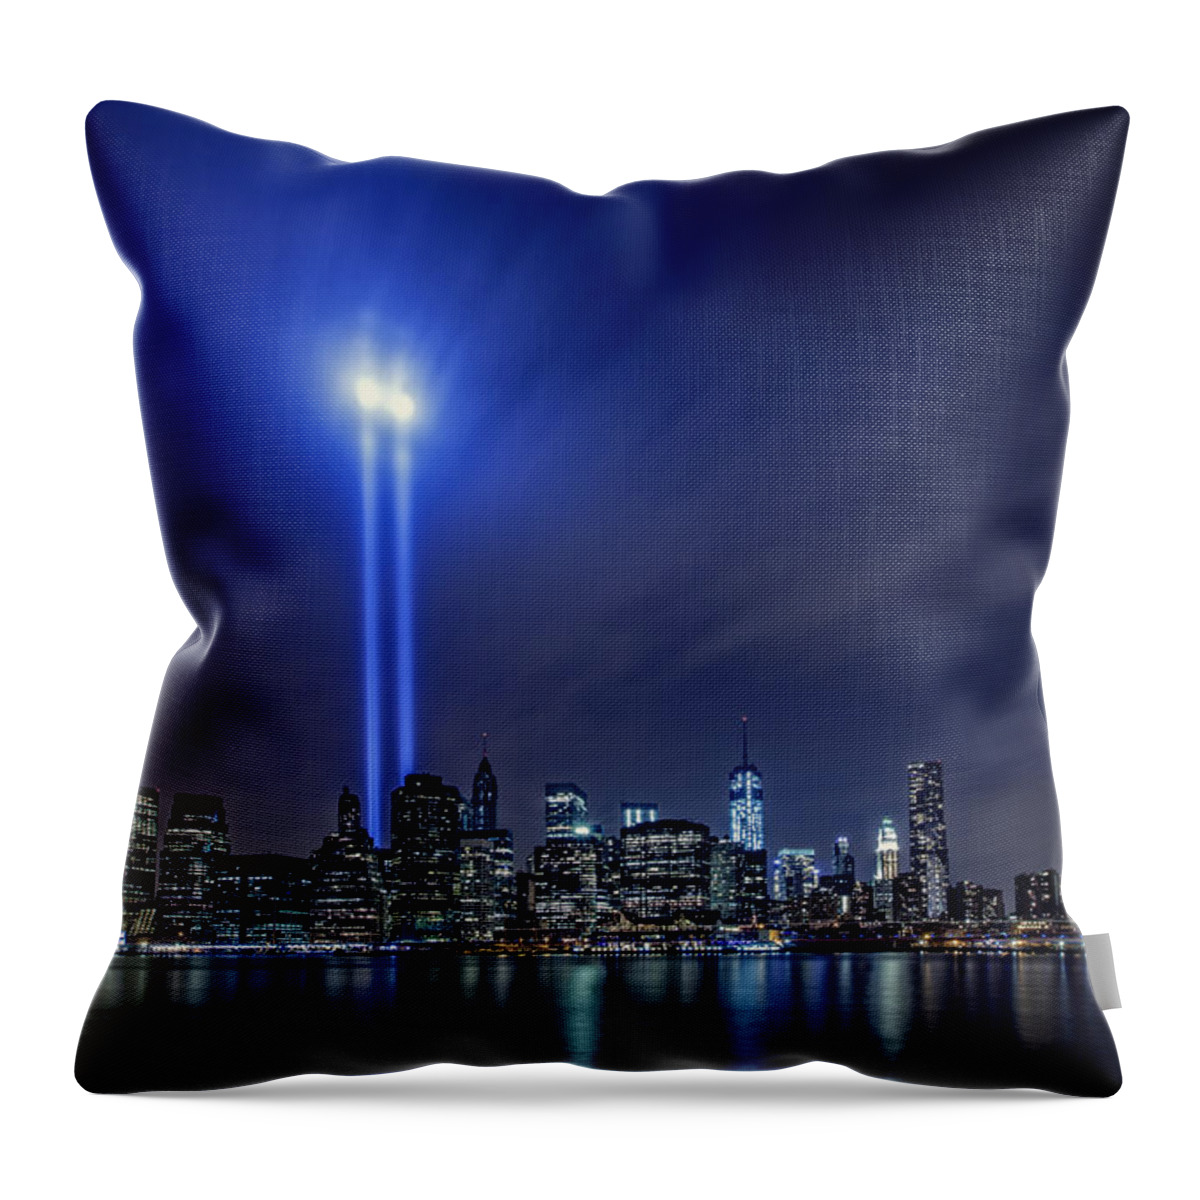 City Photographs Throw Pillow featuring the photograph We Remember by Rick Berk